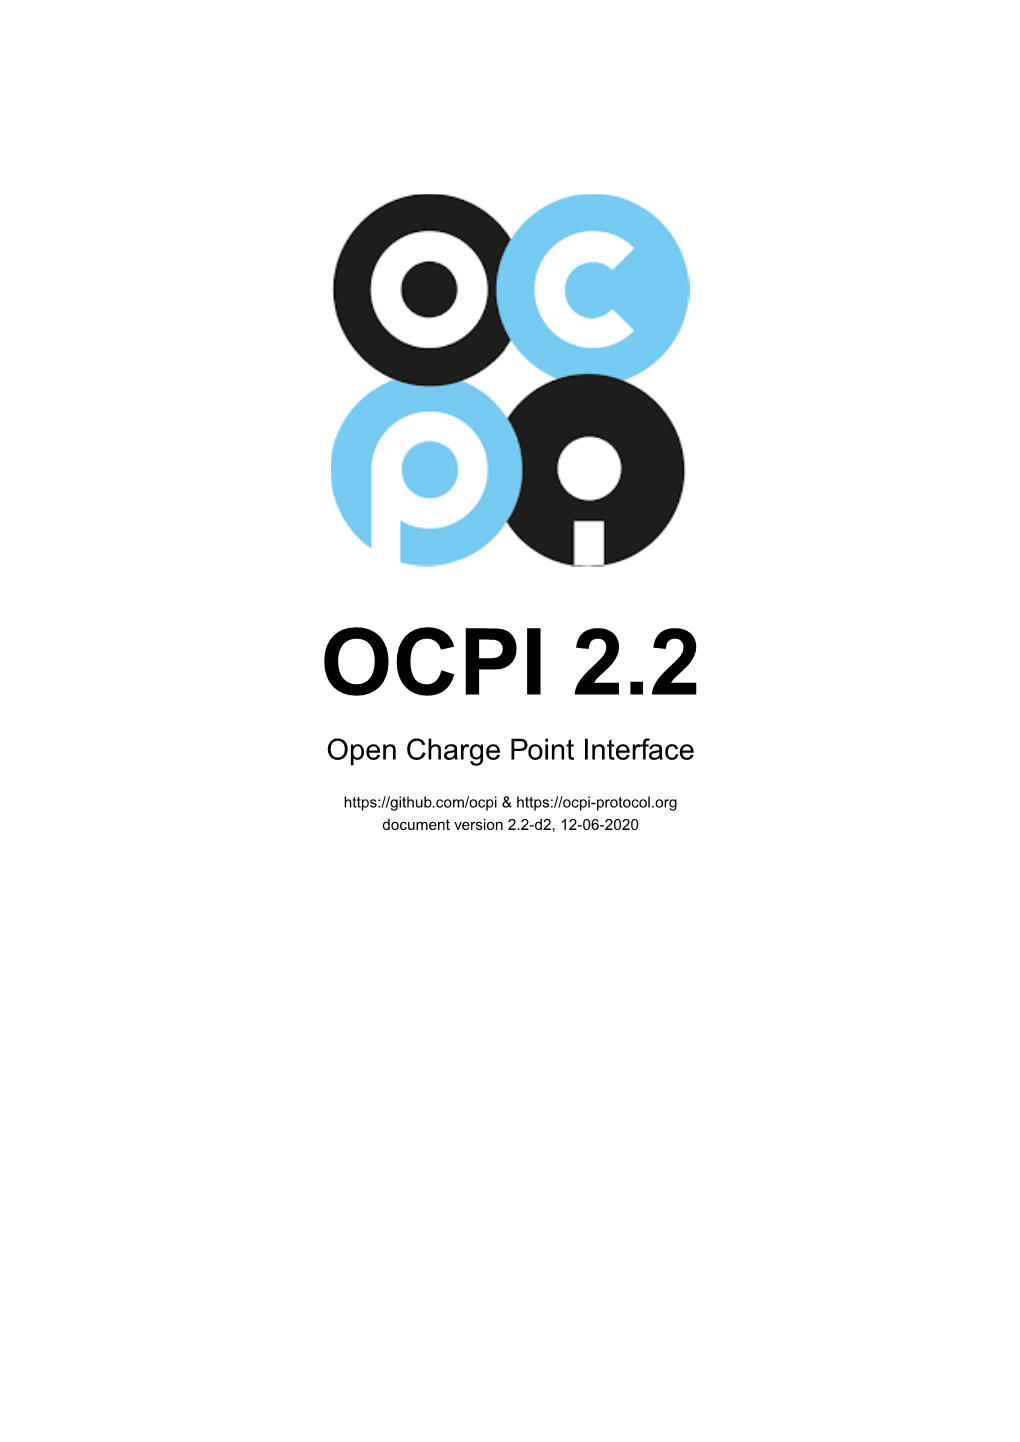 OCPI 2.2: Open Charge Point Interface